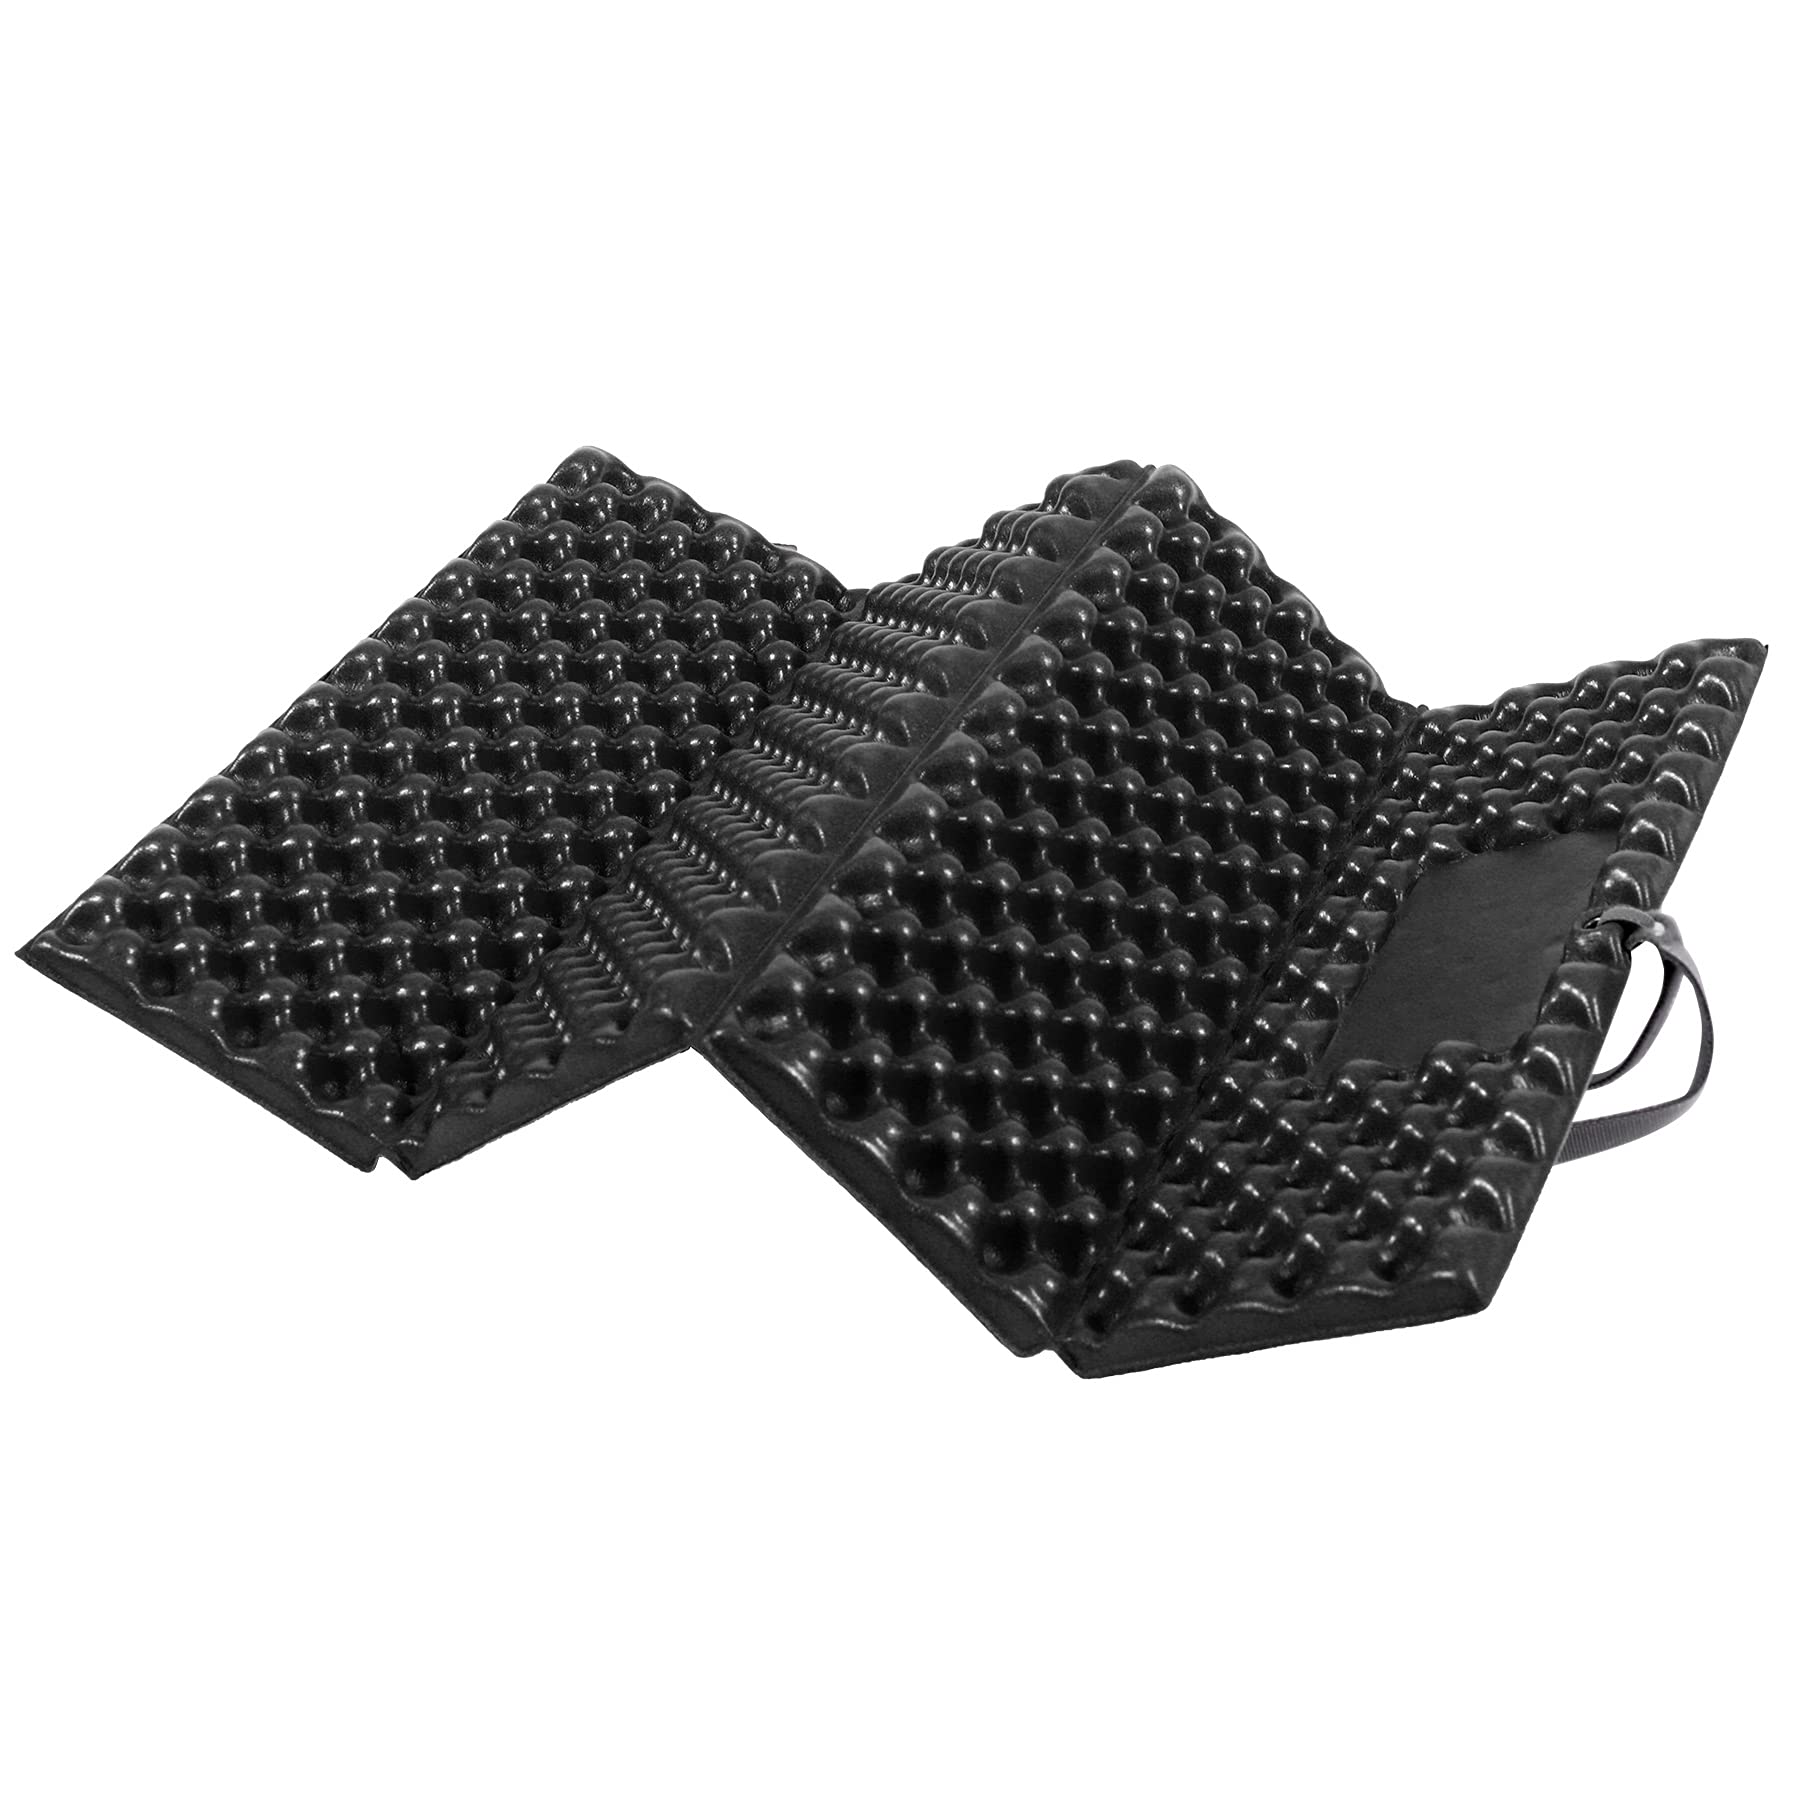 REDCAMP Foam Backpacking Sit Pad Ultralight Hiking Seat Pad for Outdoor  Camping Stadium Black 1pc Black-1pc